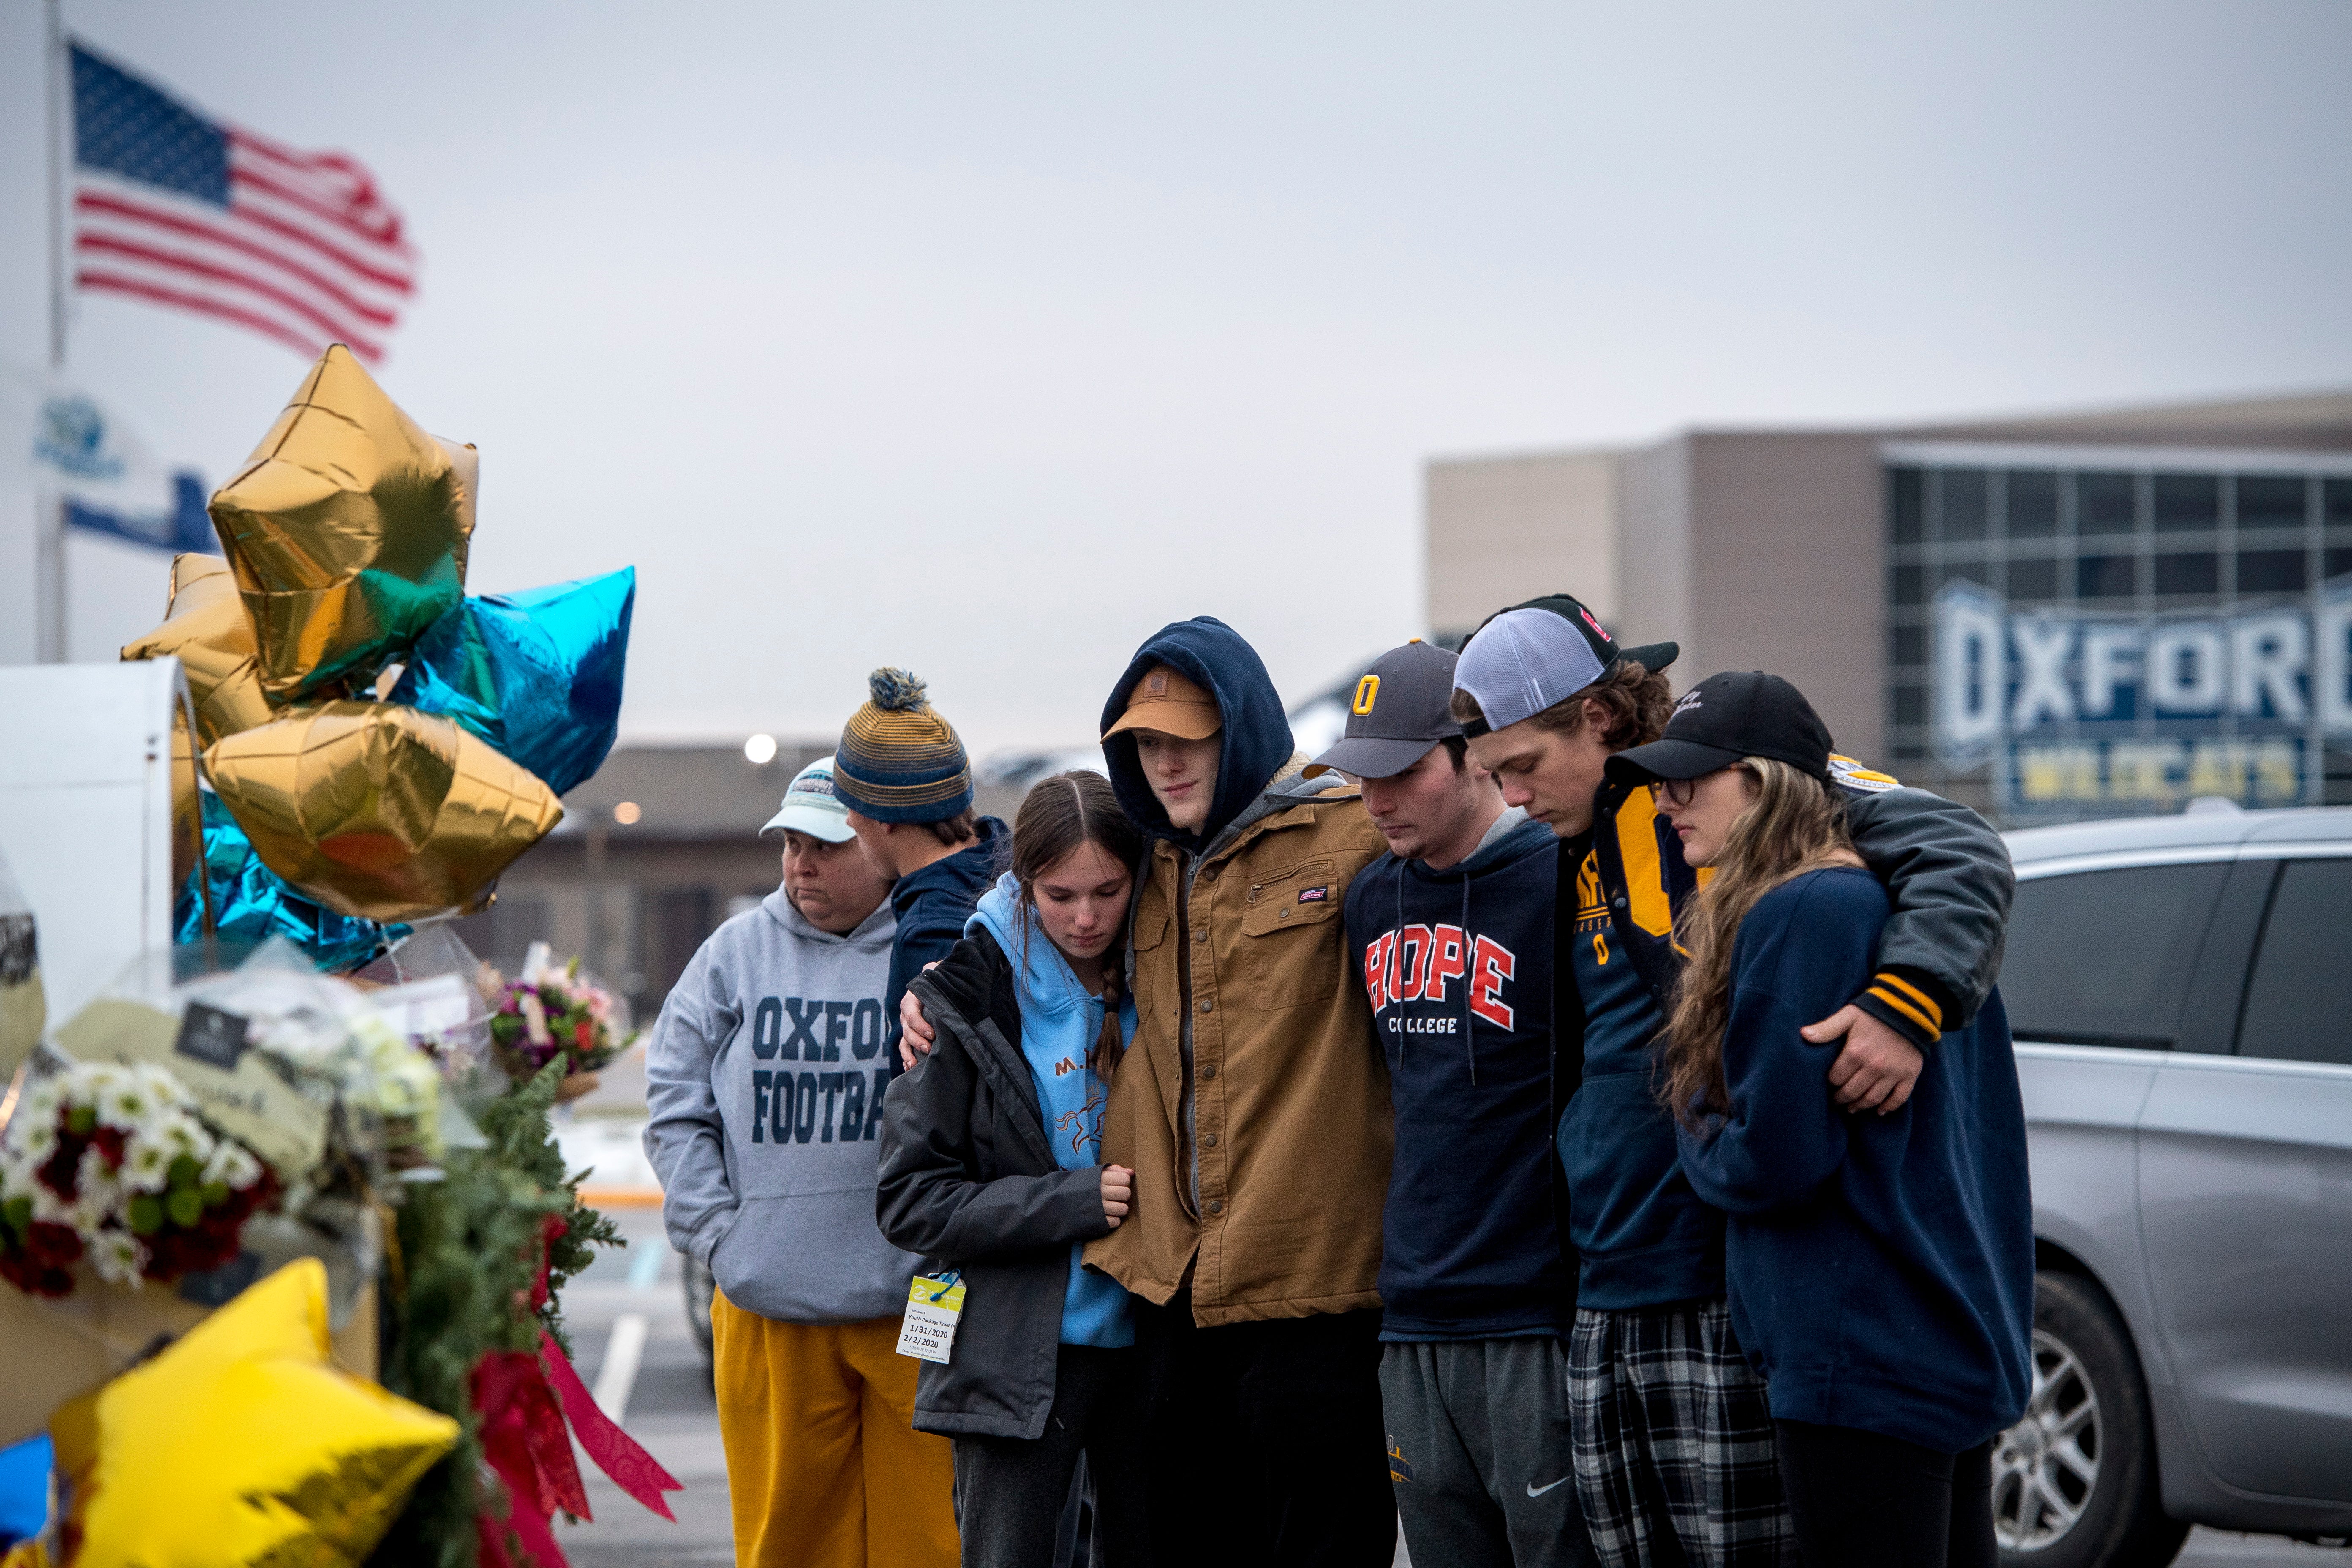 Students comfort each other at a memorial outside Oxford High School in Michigan where four students were killed in the most recent mass shooting at a US school